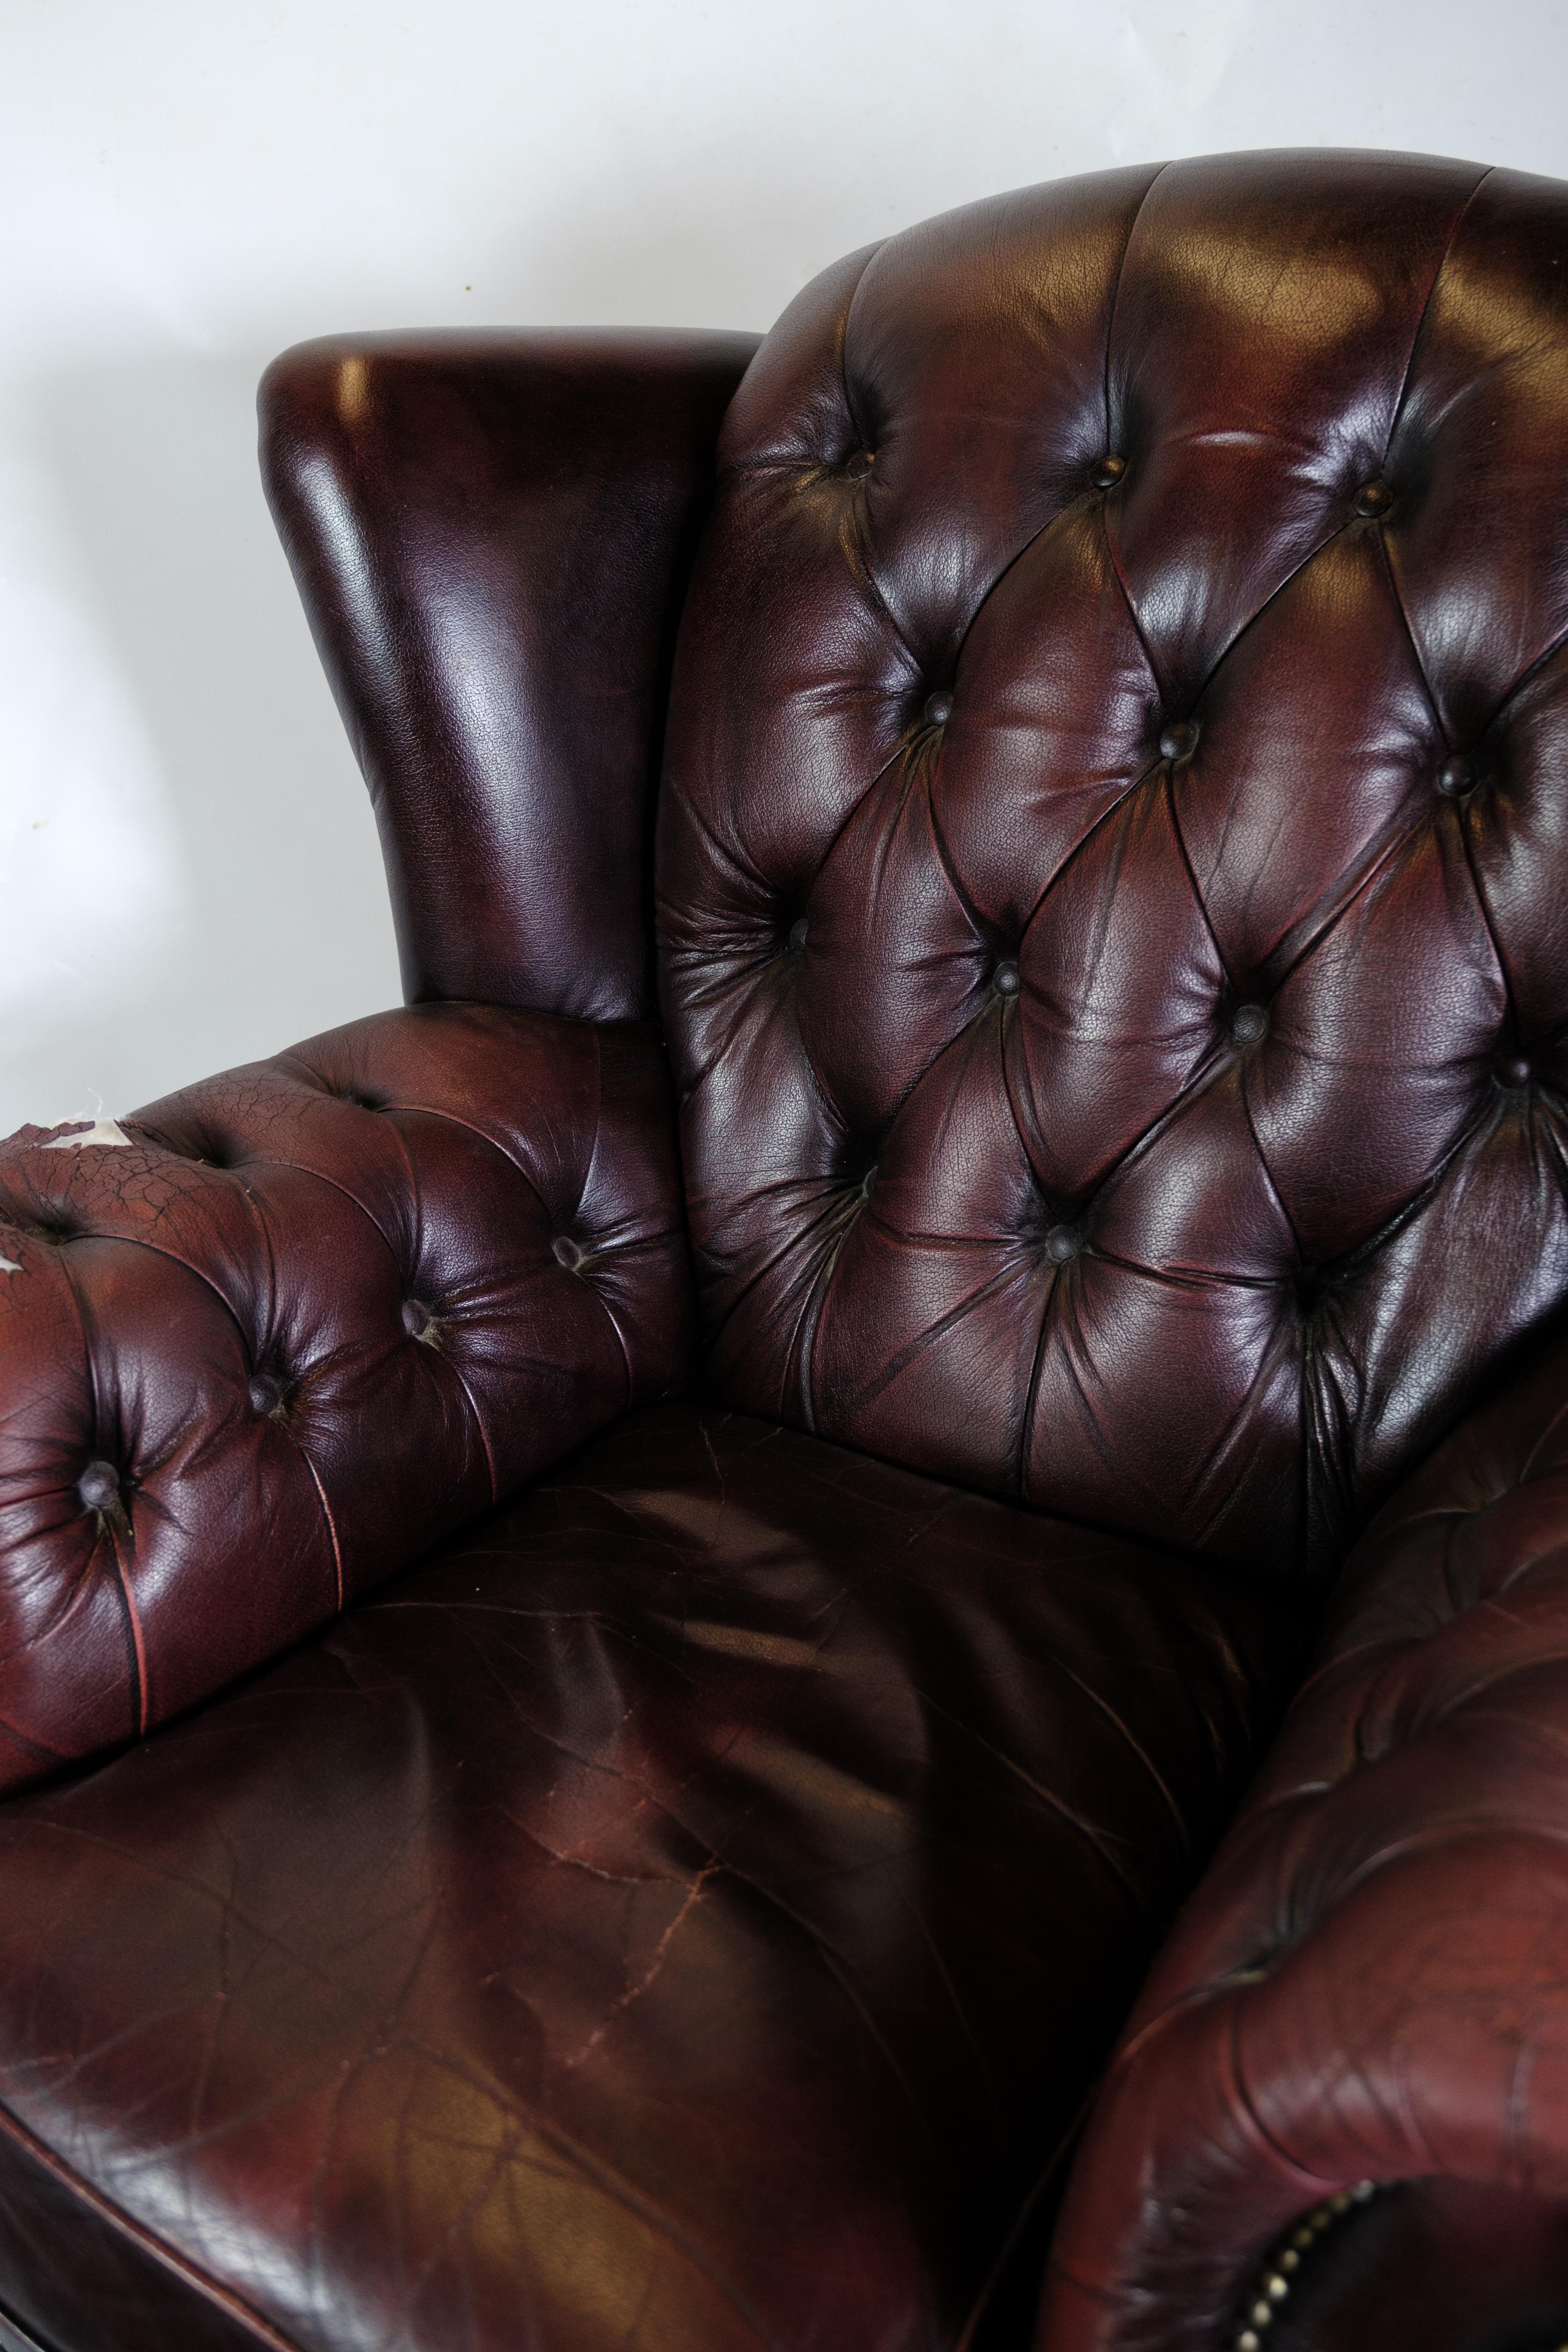 This Chesterfield armchair with matching footstool is a classic representation of timeless elegance and comfort. With black lacquered wooden legs and beautifully upholstered in studded leather, this set exudes both luxury and traditional